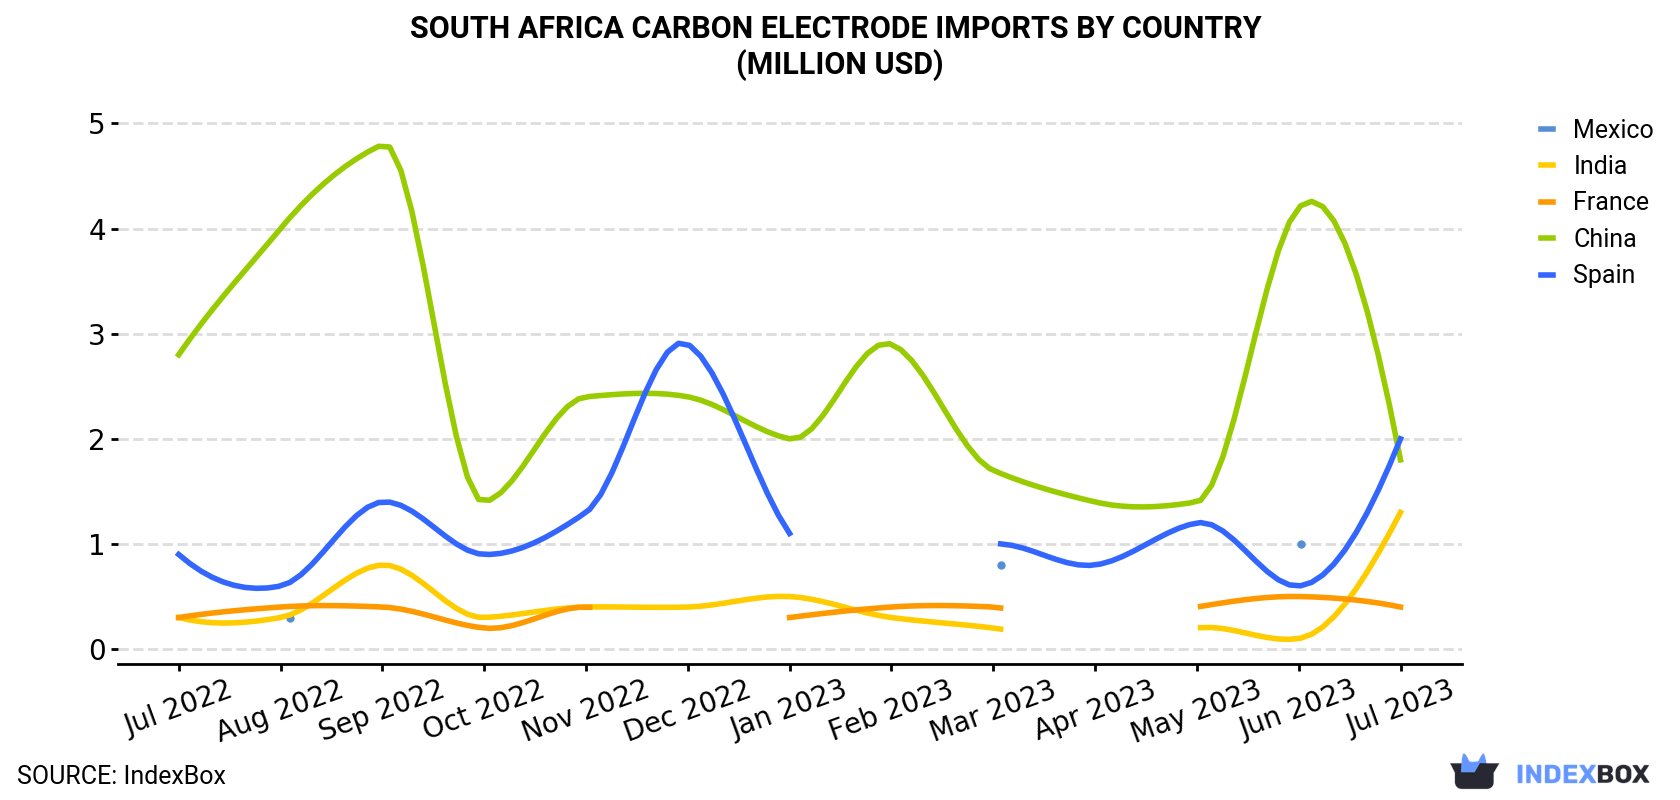 South Africa Carbon Electrode Imports By Country (Million USD)